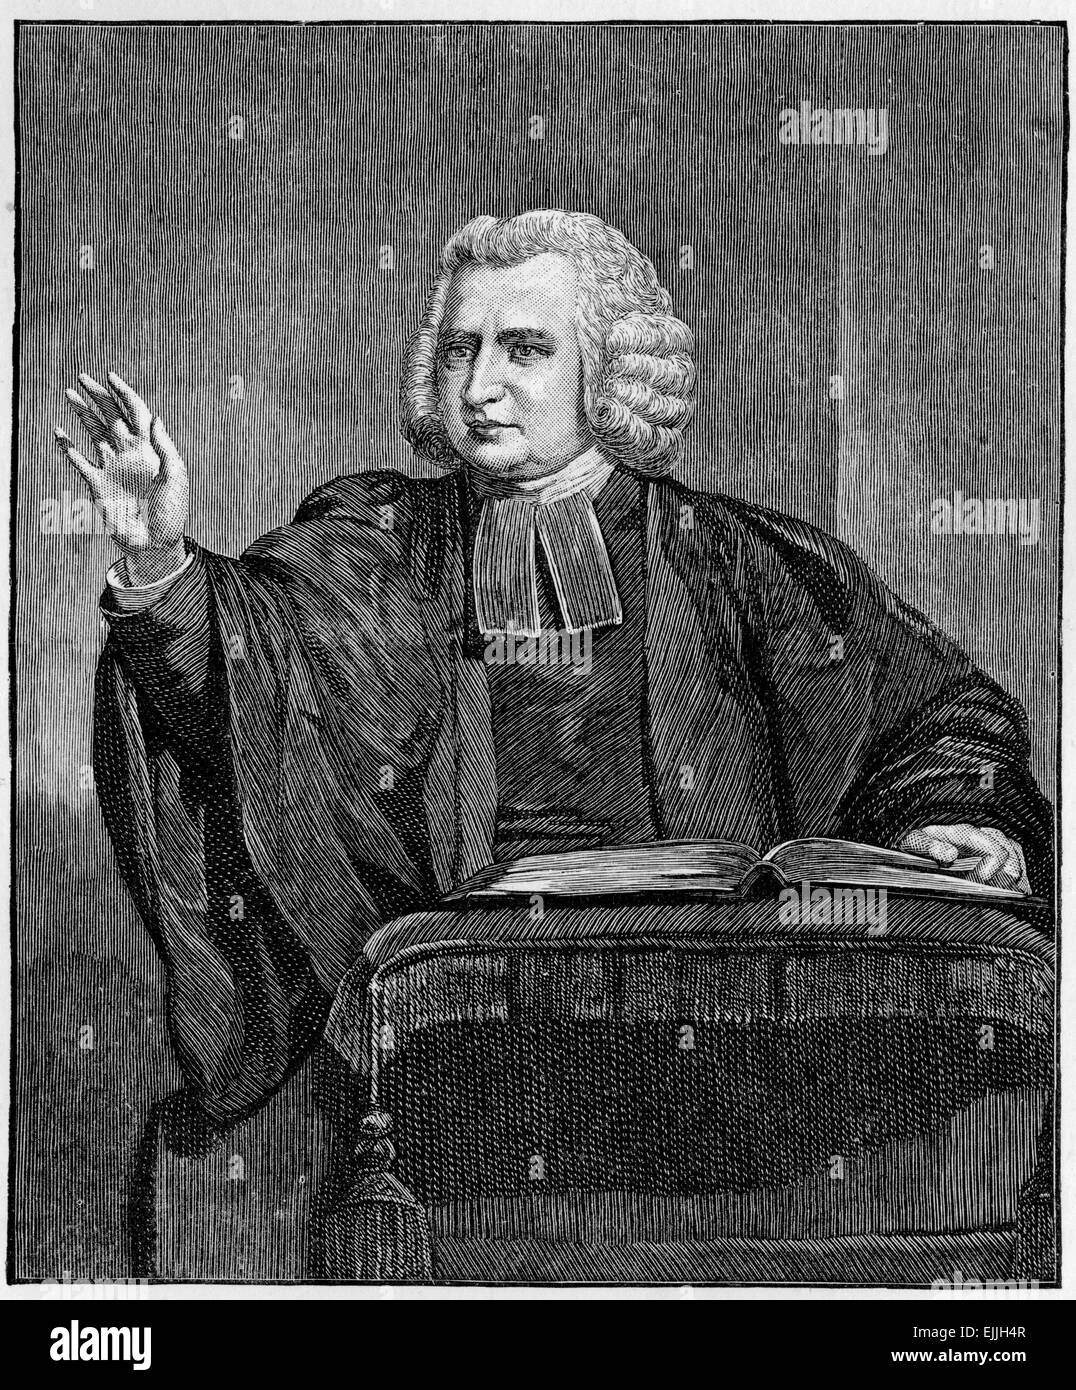 Charles Wesley preaching from the pulpit, engraving from Selections from the Journal of John Wesley, 1891 Stock Photo